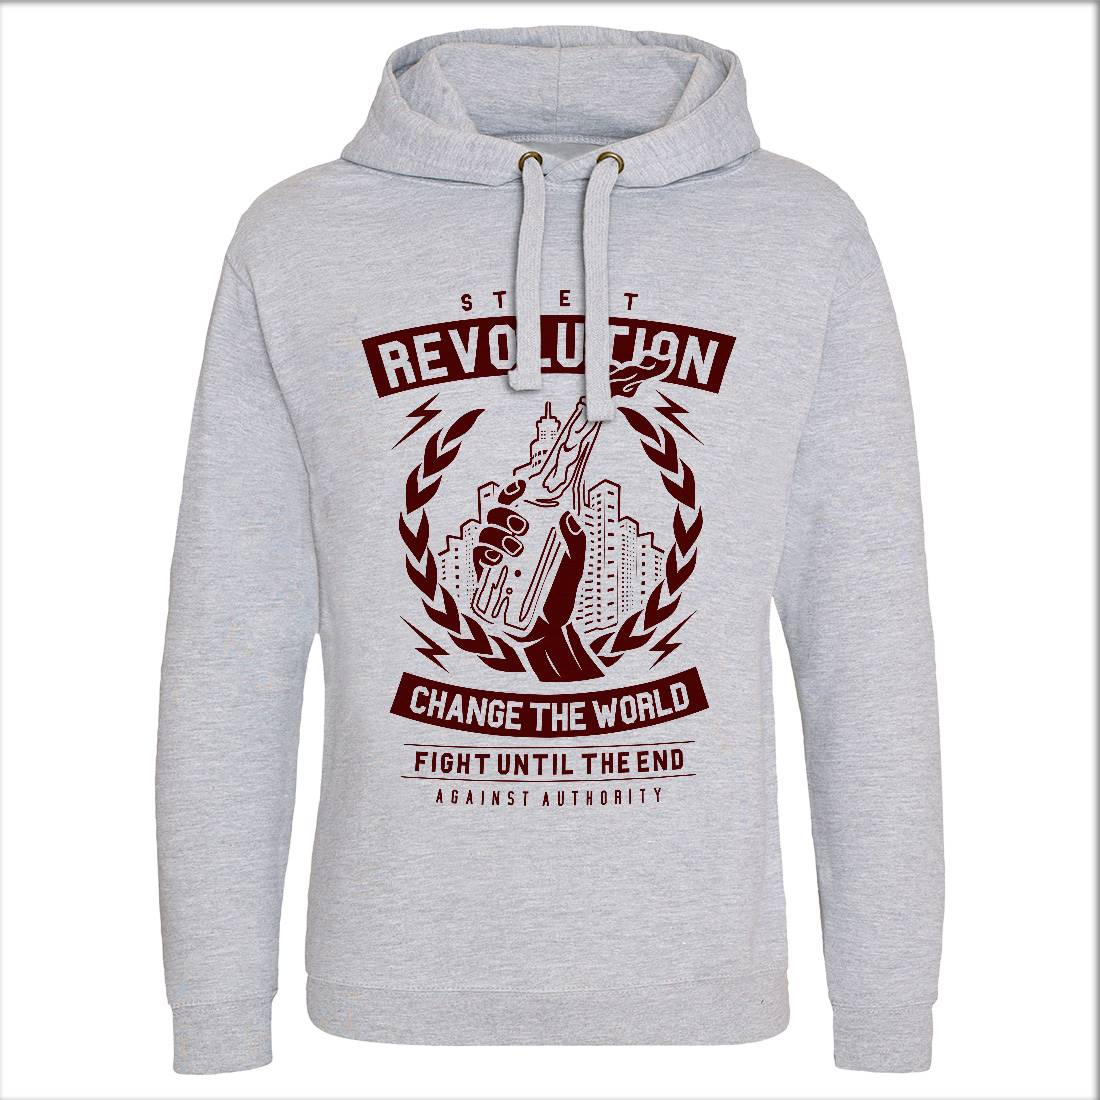 Street Revolution Mens Hoodie Without Pocket Quotes A287